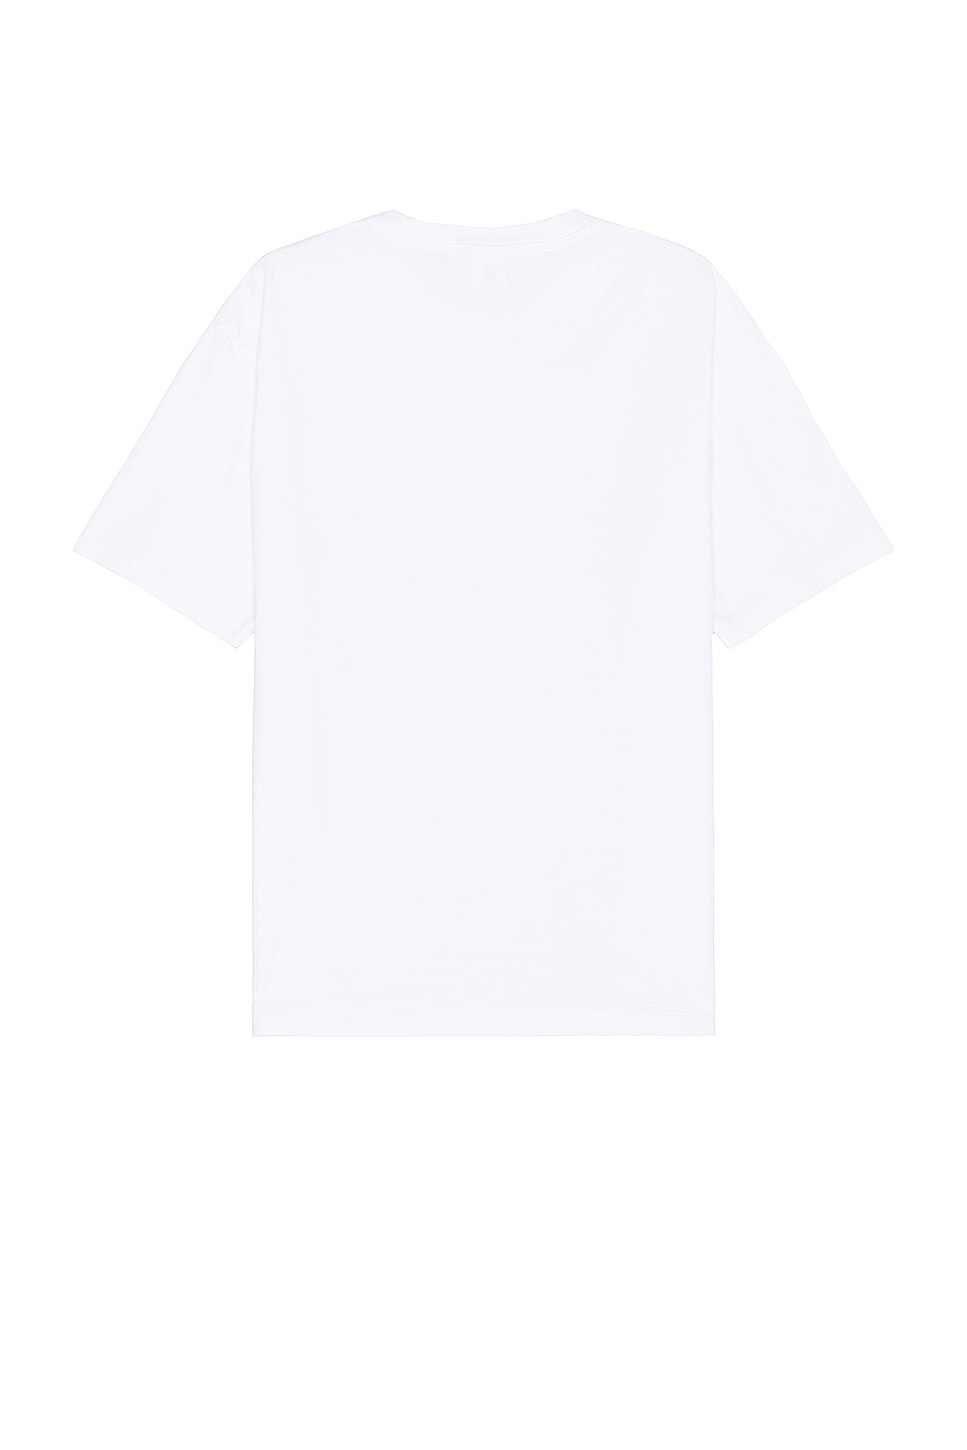 Washed Heavy Weight Crew Neck T-Shirt - 2